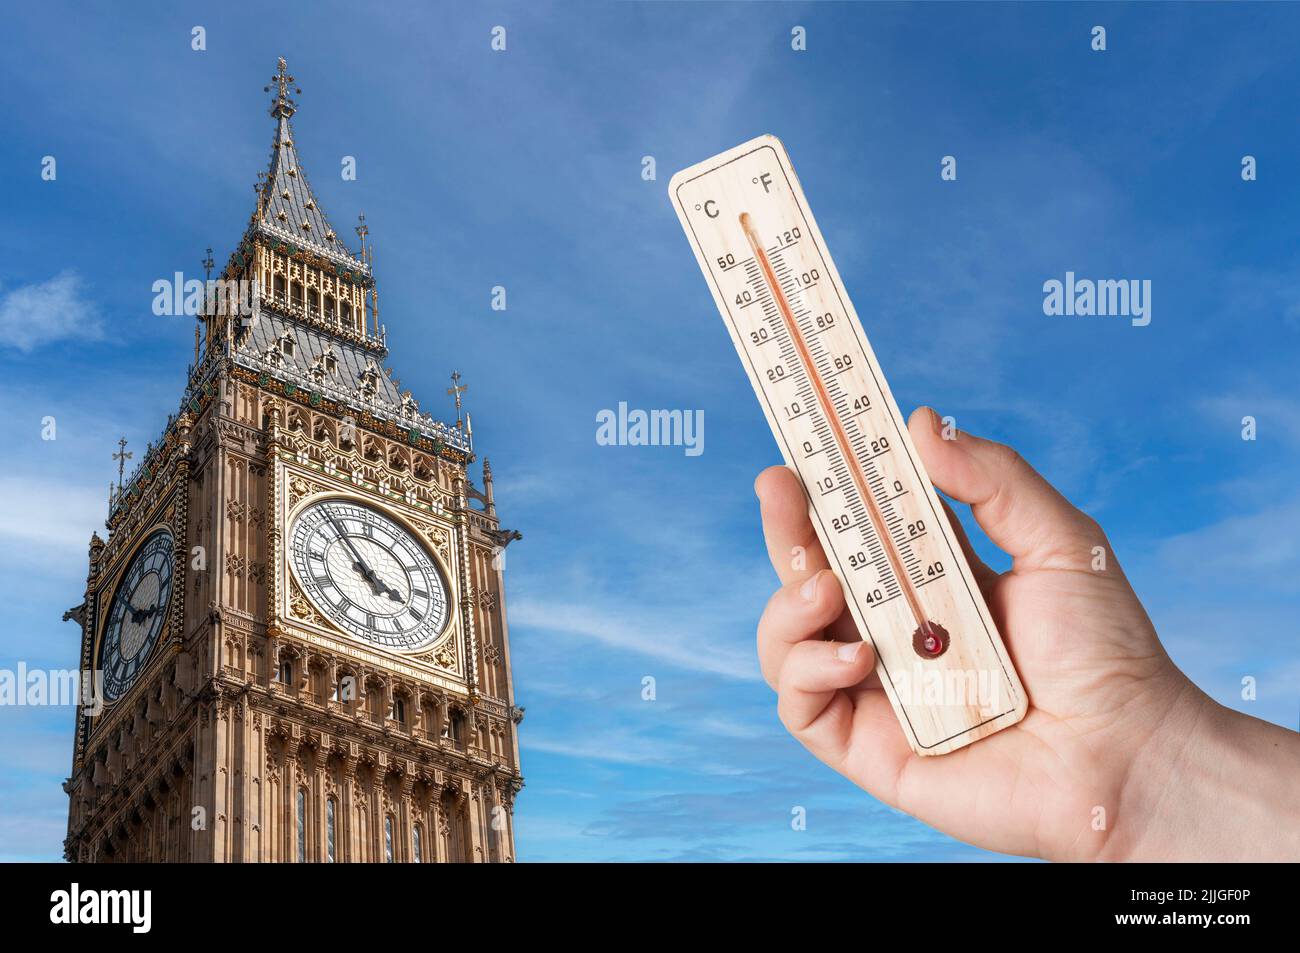 Uk heatwave concept: mah hold a thermometer in front of the Big Ben Stock Photo